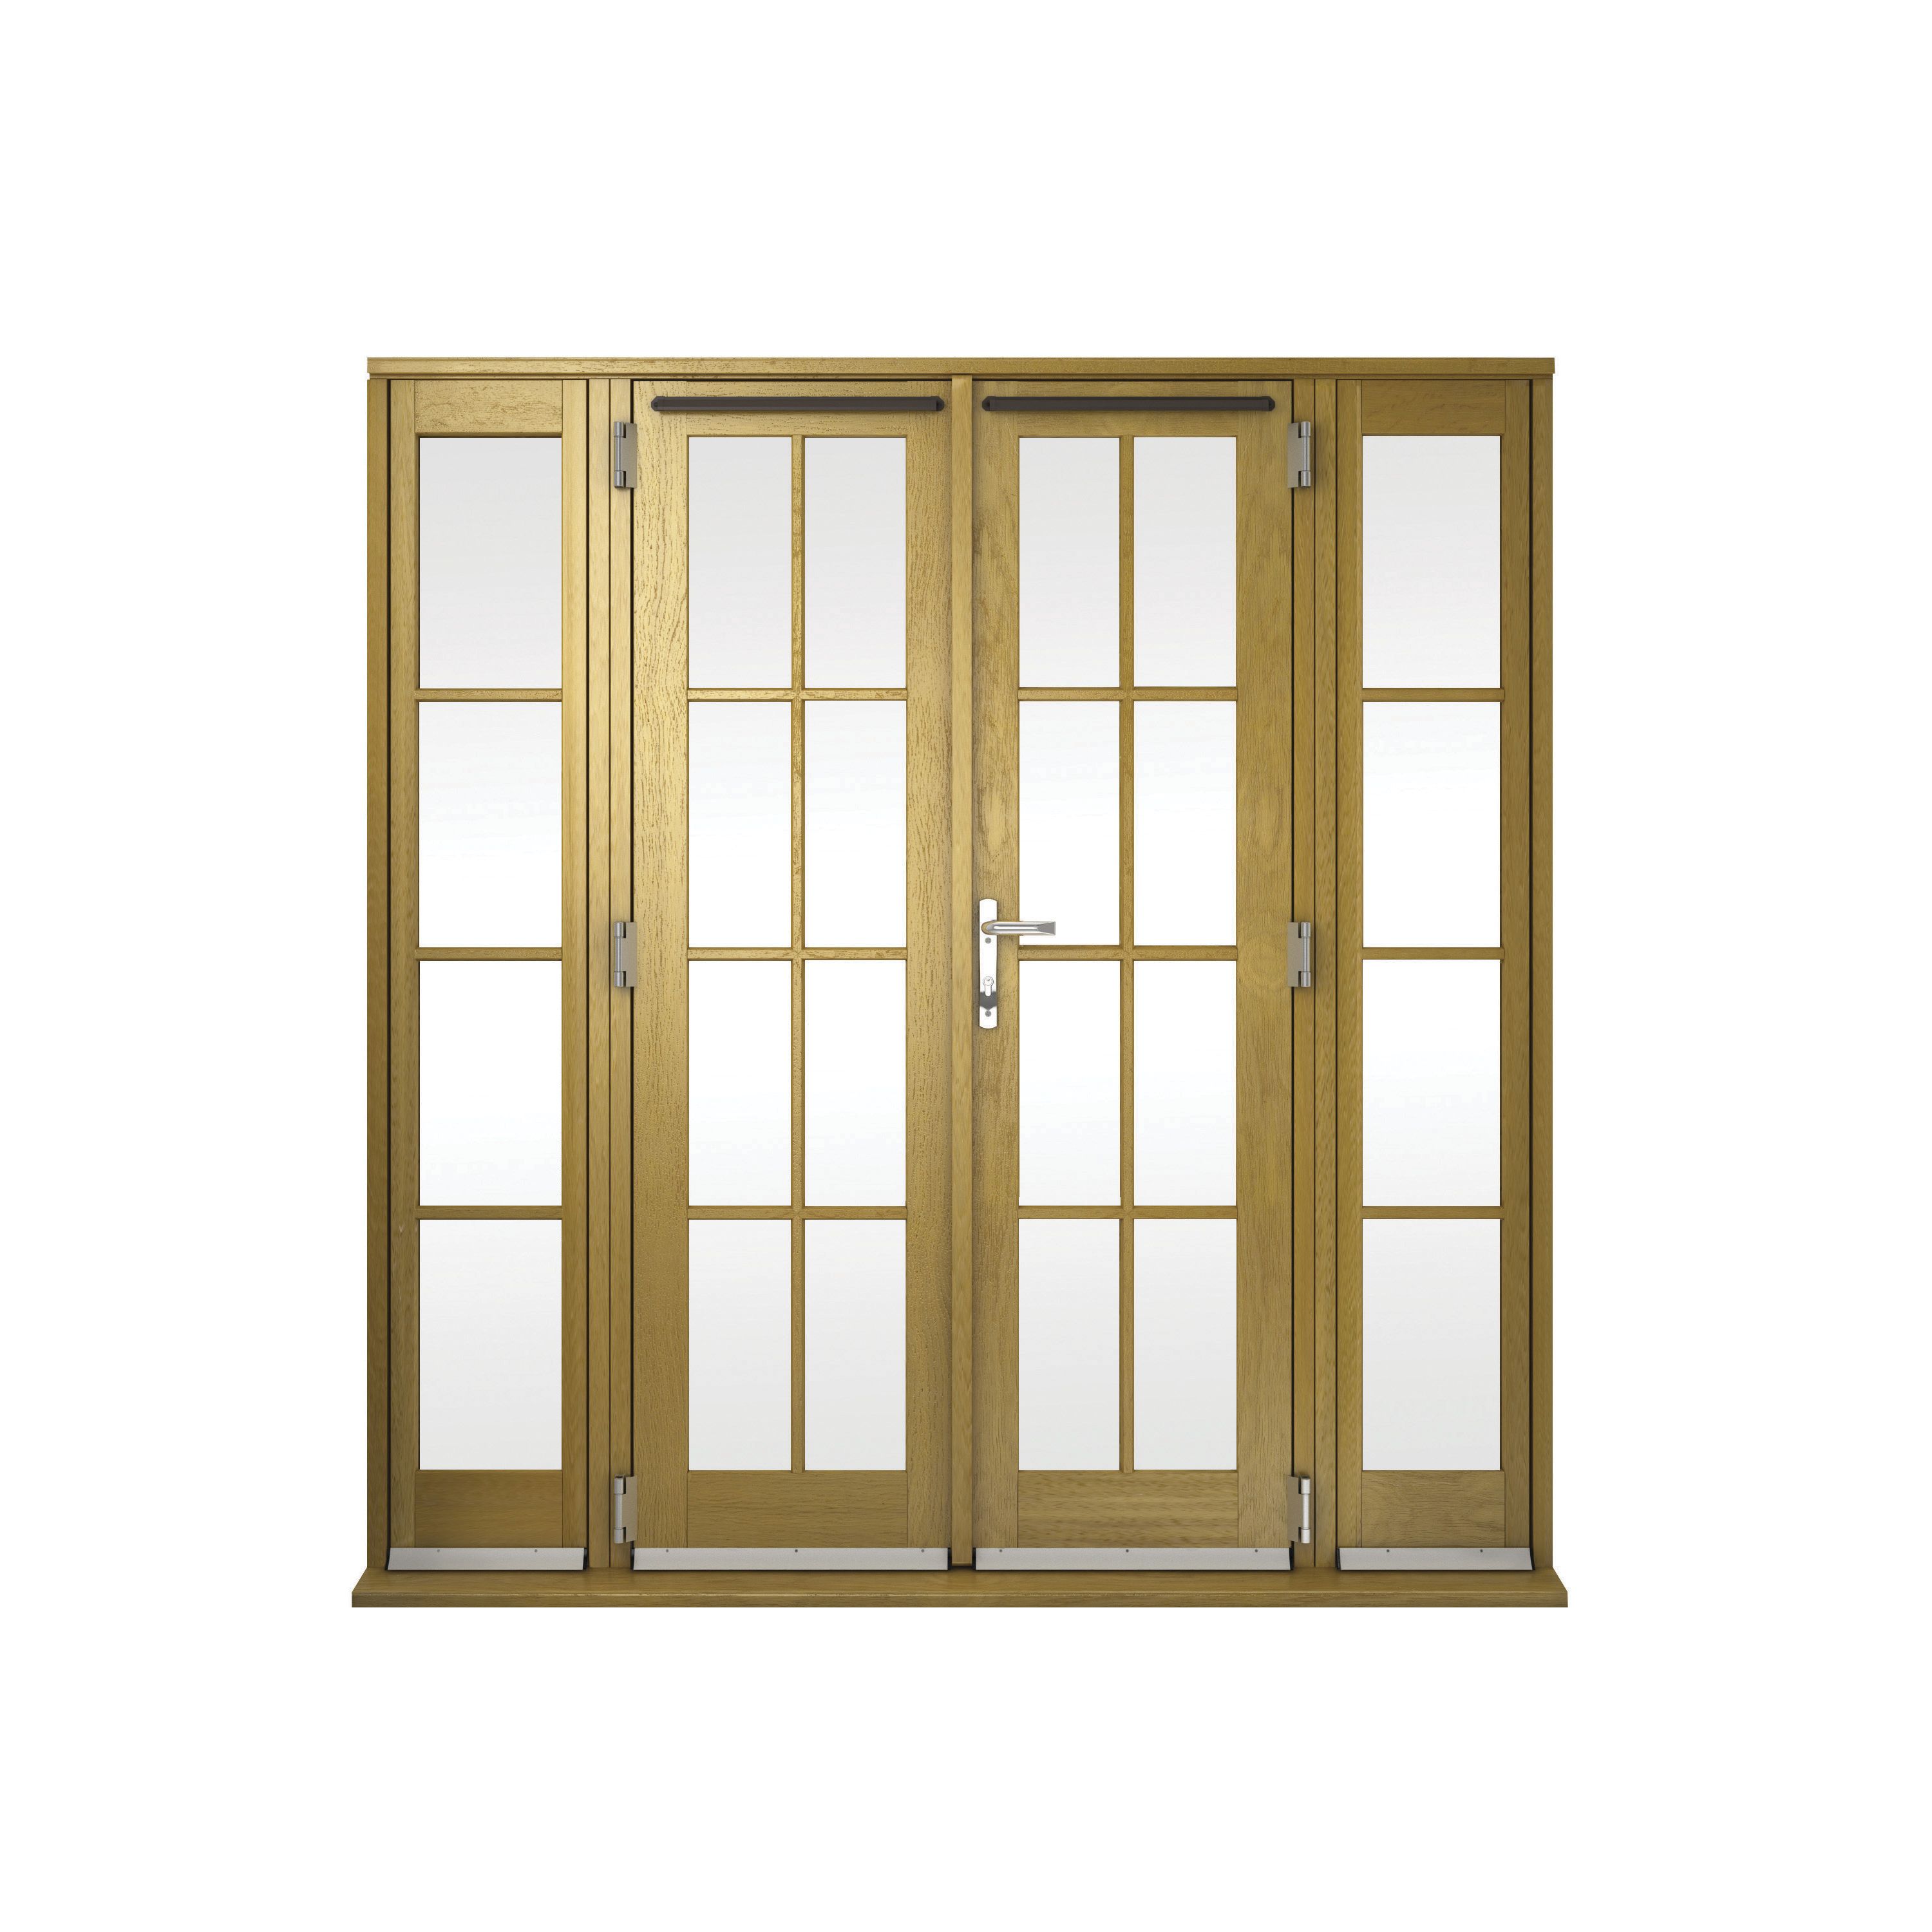 Image of Wickes Albery Georgian Bar Solid Oak Laminate French Doors 6ft with 2 Side Lites 300mm